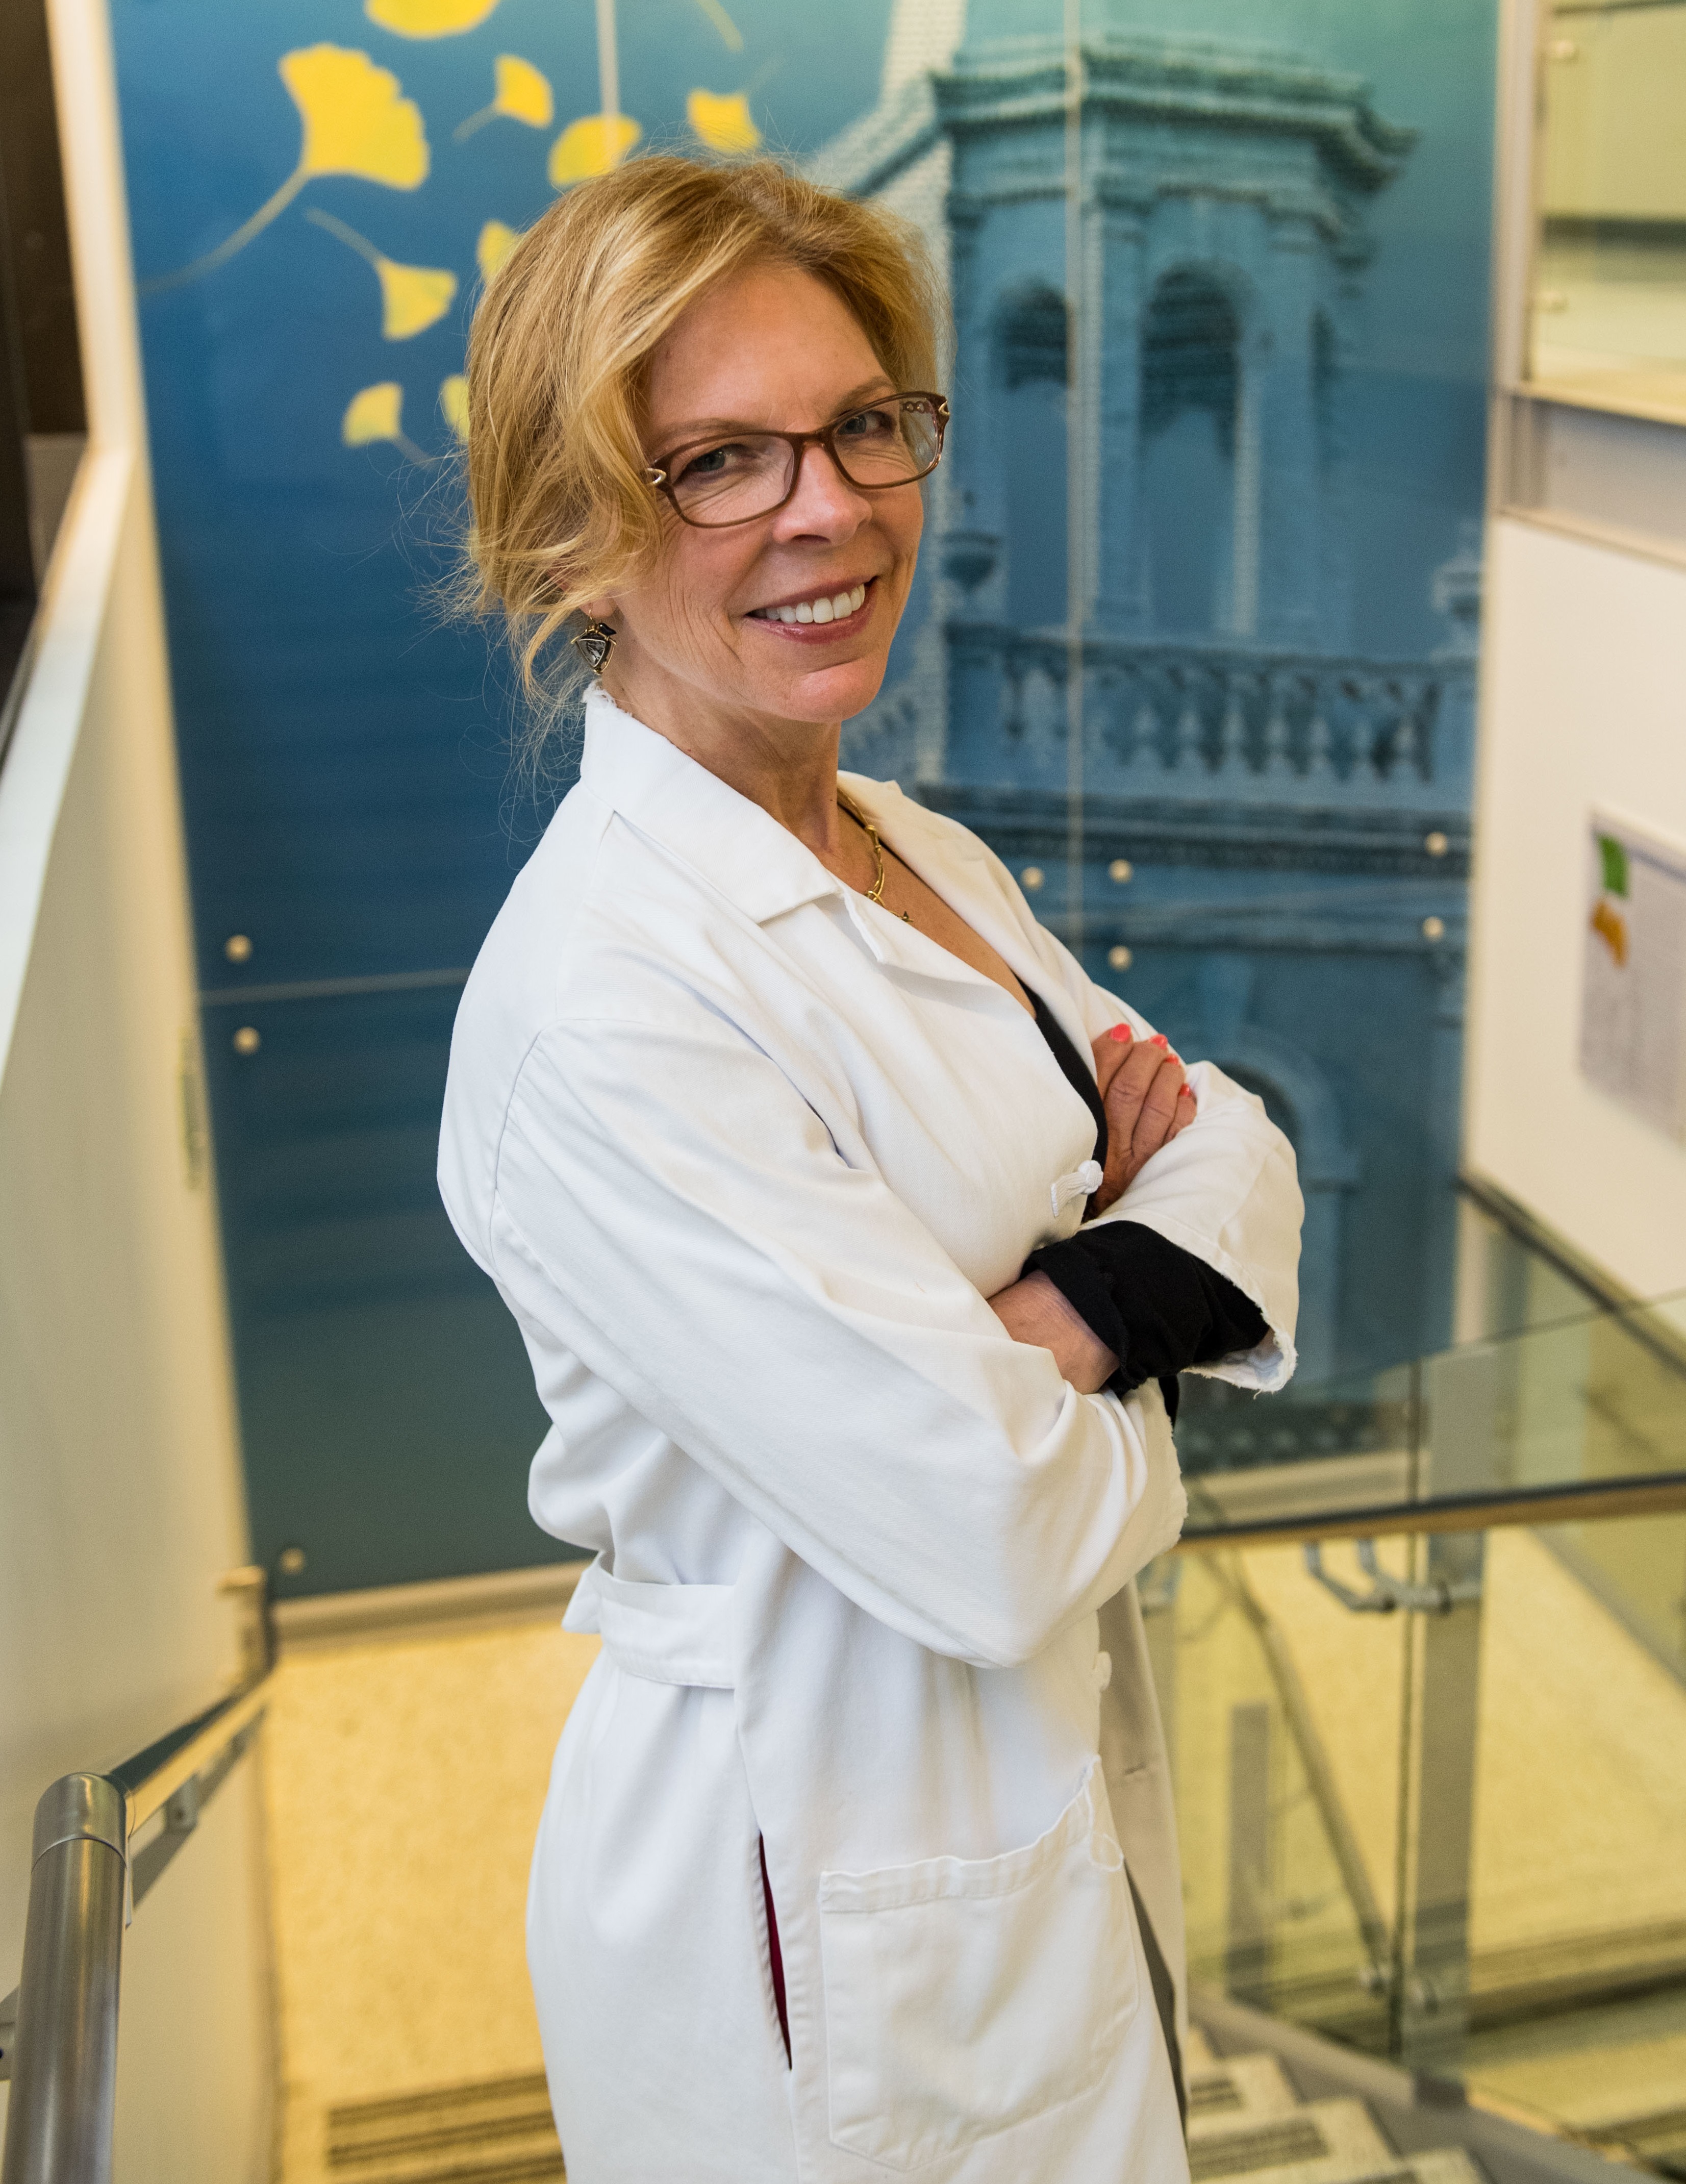 Photo of Kathryn Sandberg, PhD standing in a bright stairway wearing a white lab coat